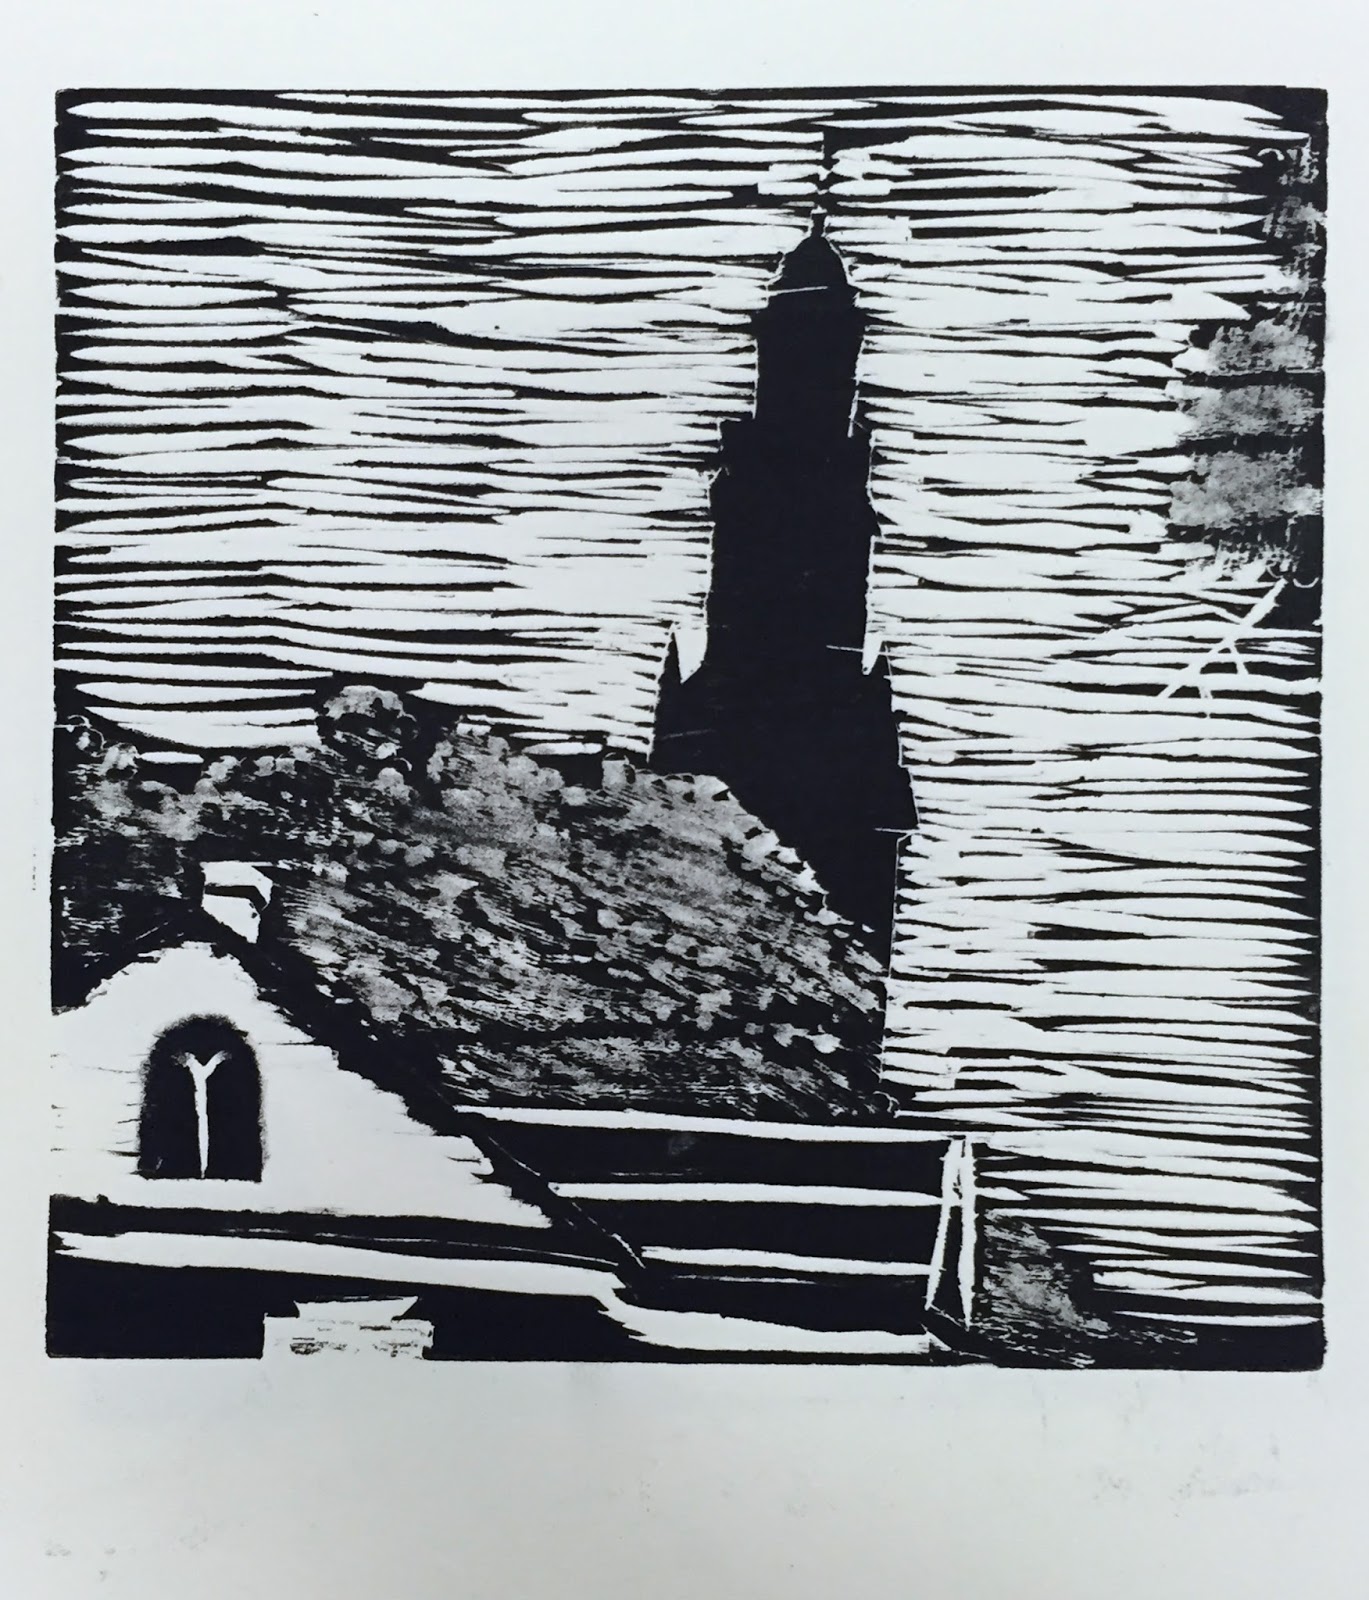 Expanded learning and practice: Printmaking